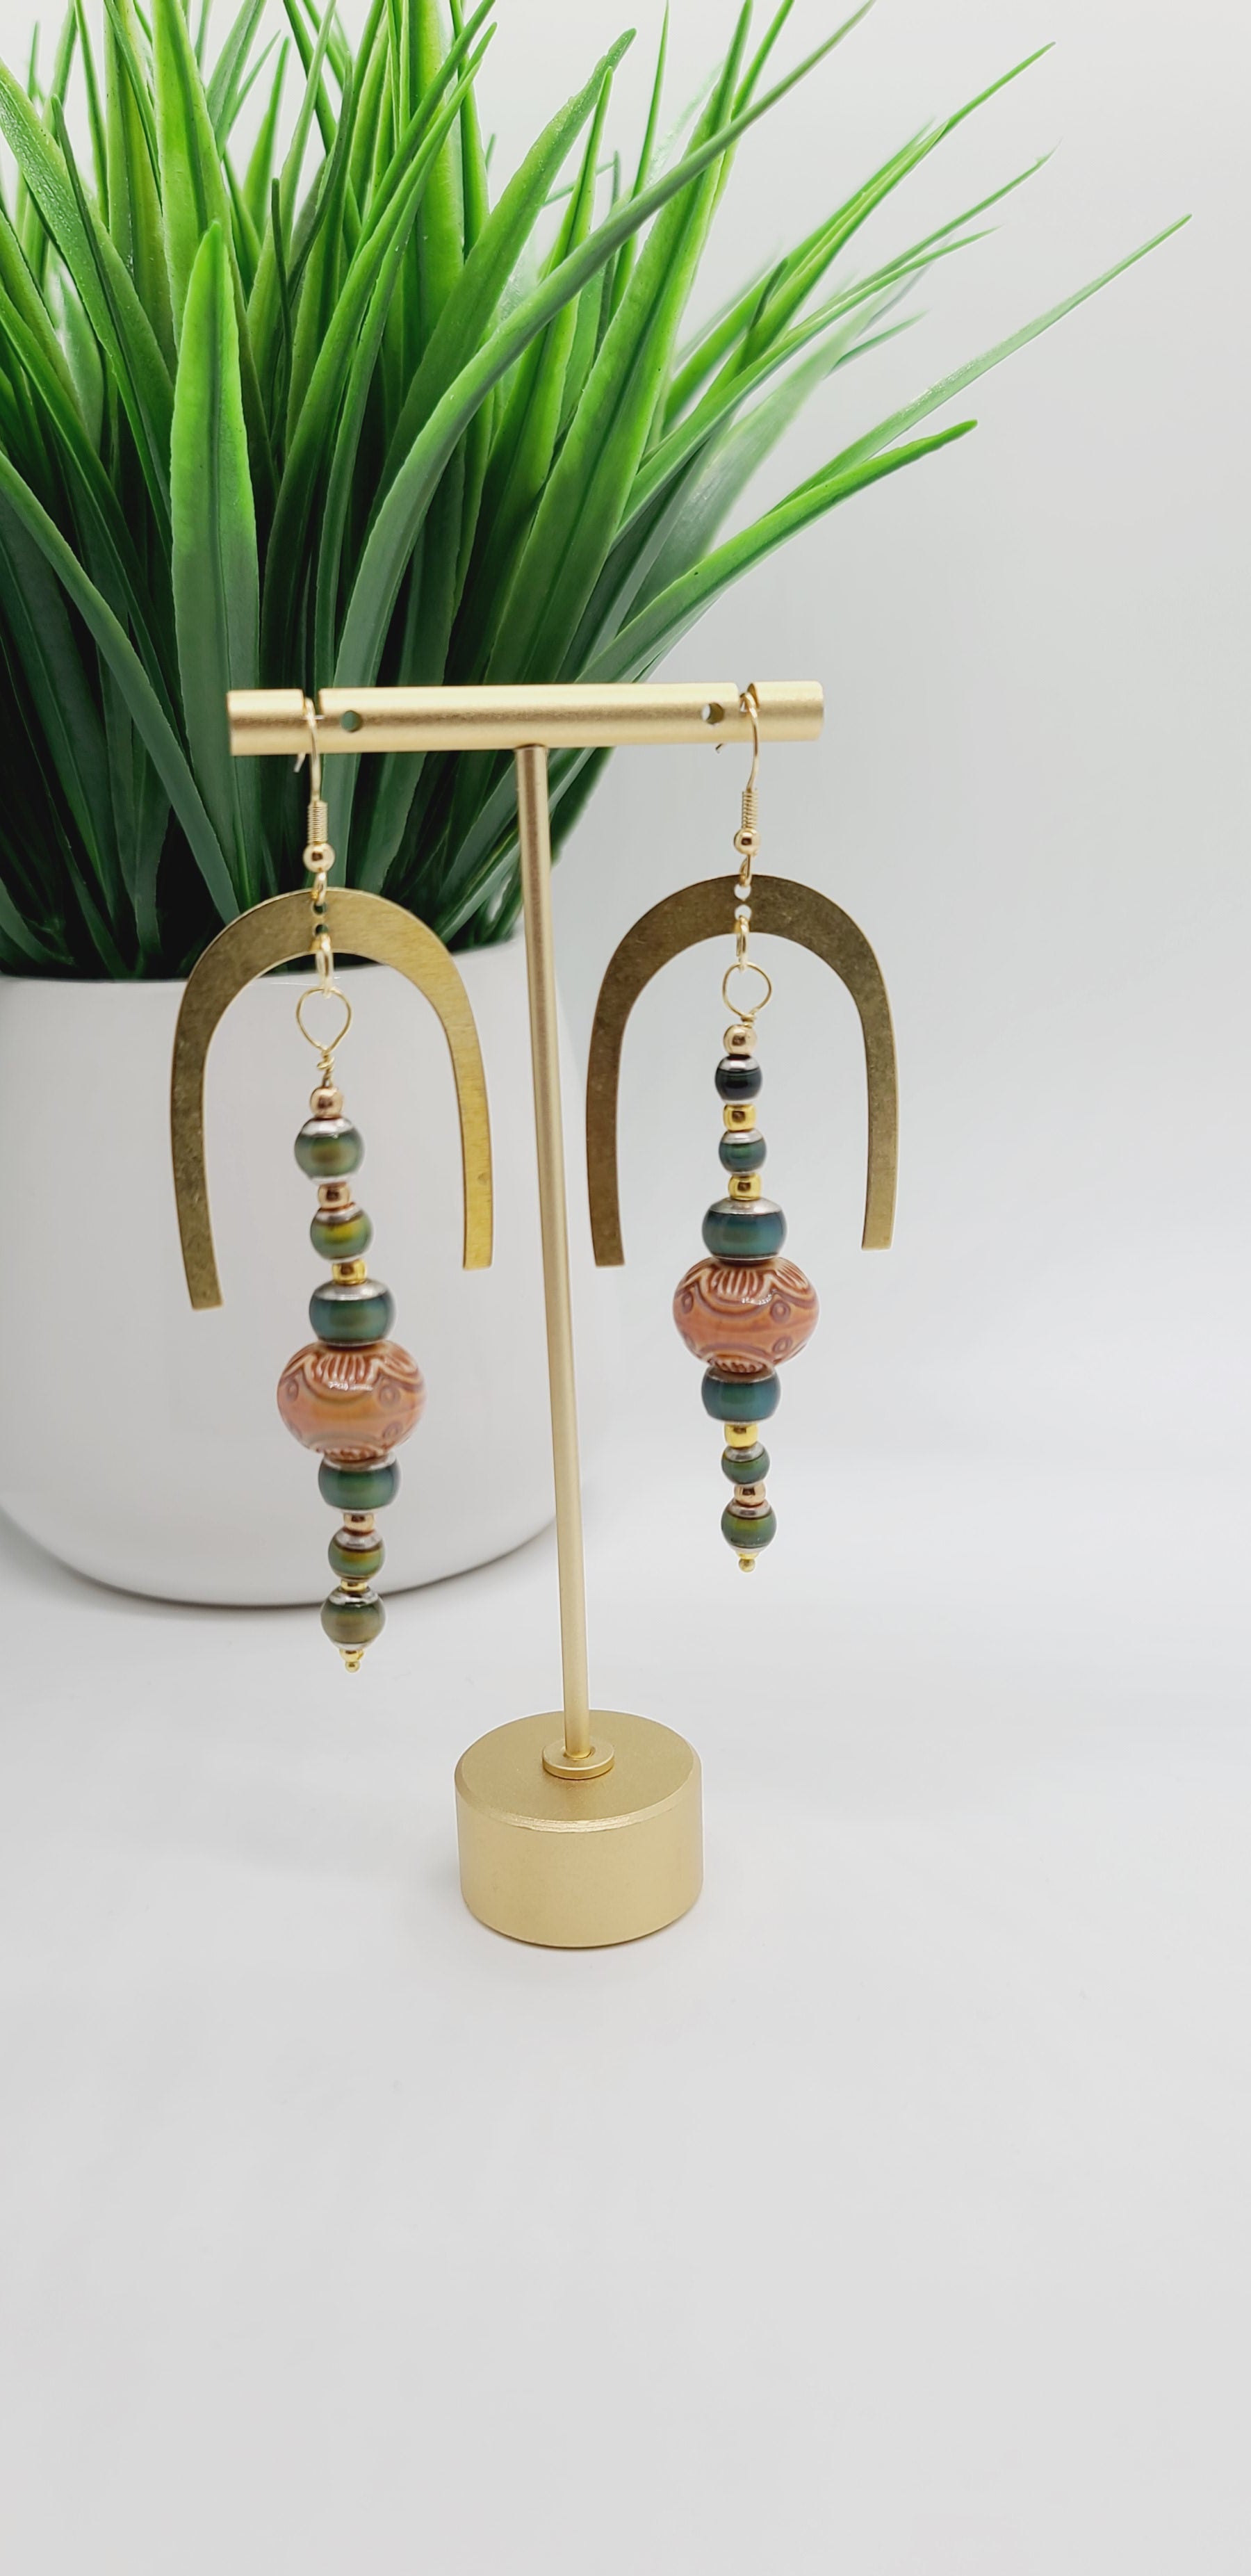 Length: 4 inches | Weight: 0.8 ounces  Distinctly You! These earrings are made with gold horseshoe charm, amber printed wood covered with resin beads, 6mm and 4mm green resin beads, and gold seed beads.